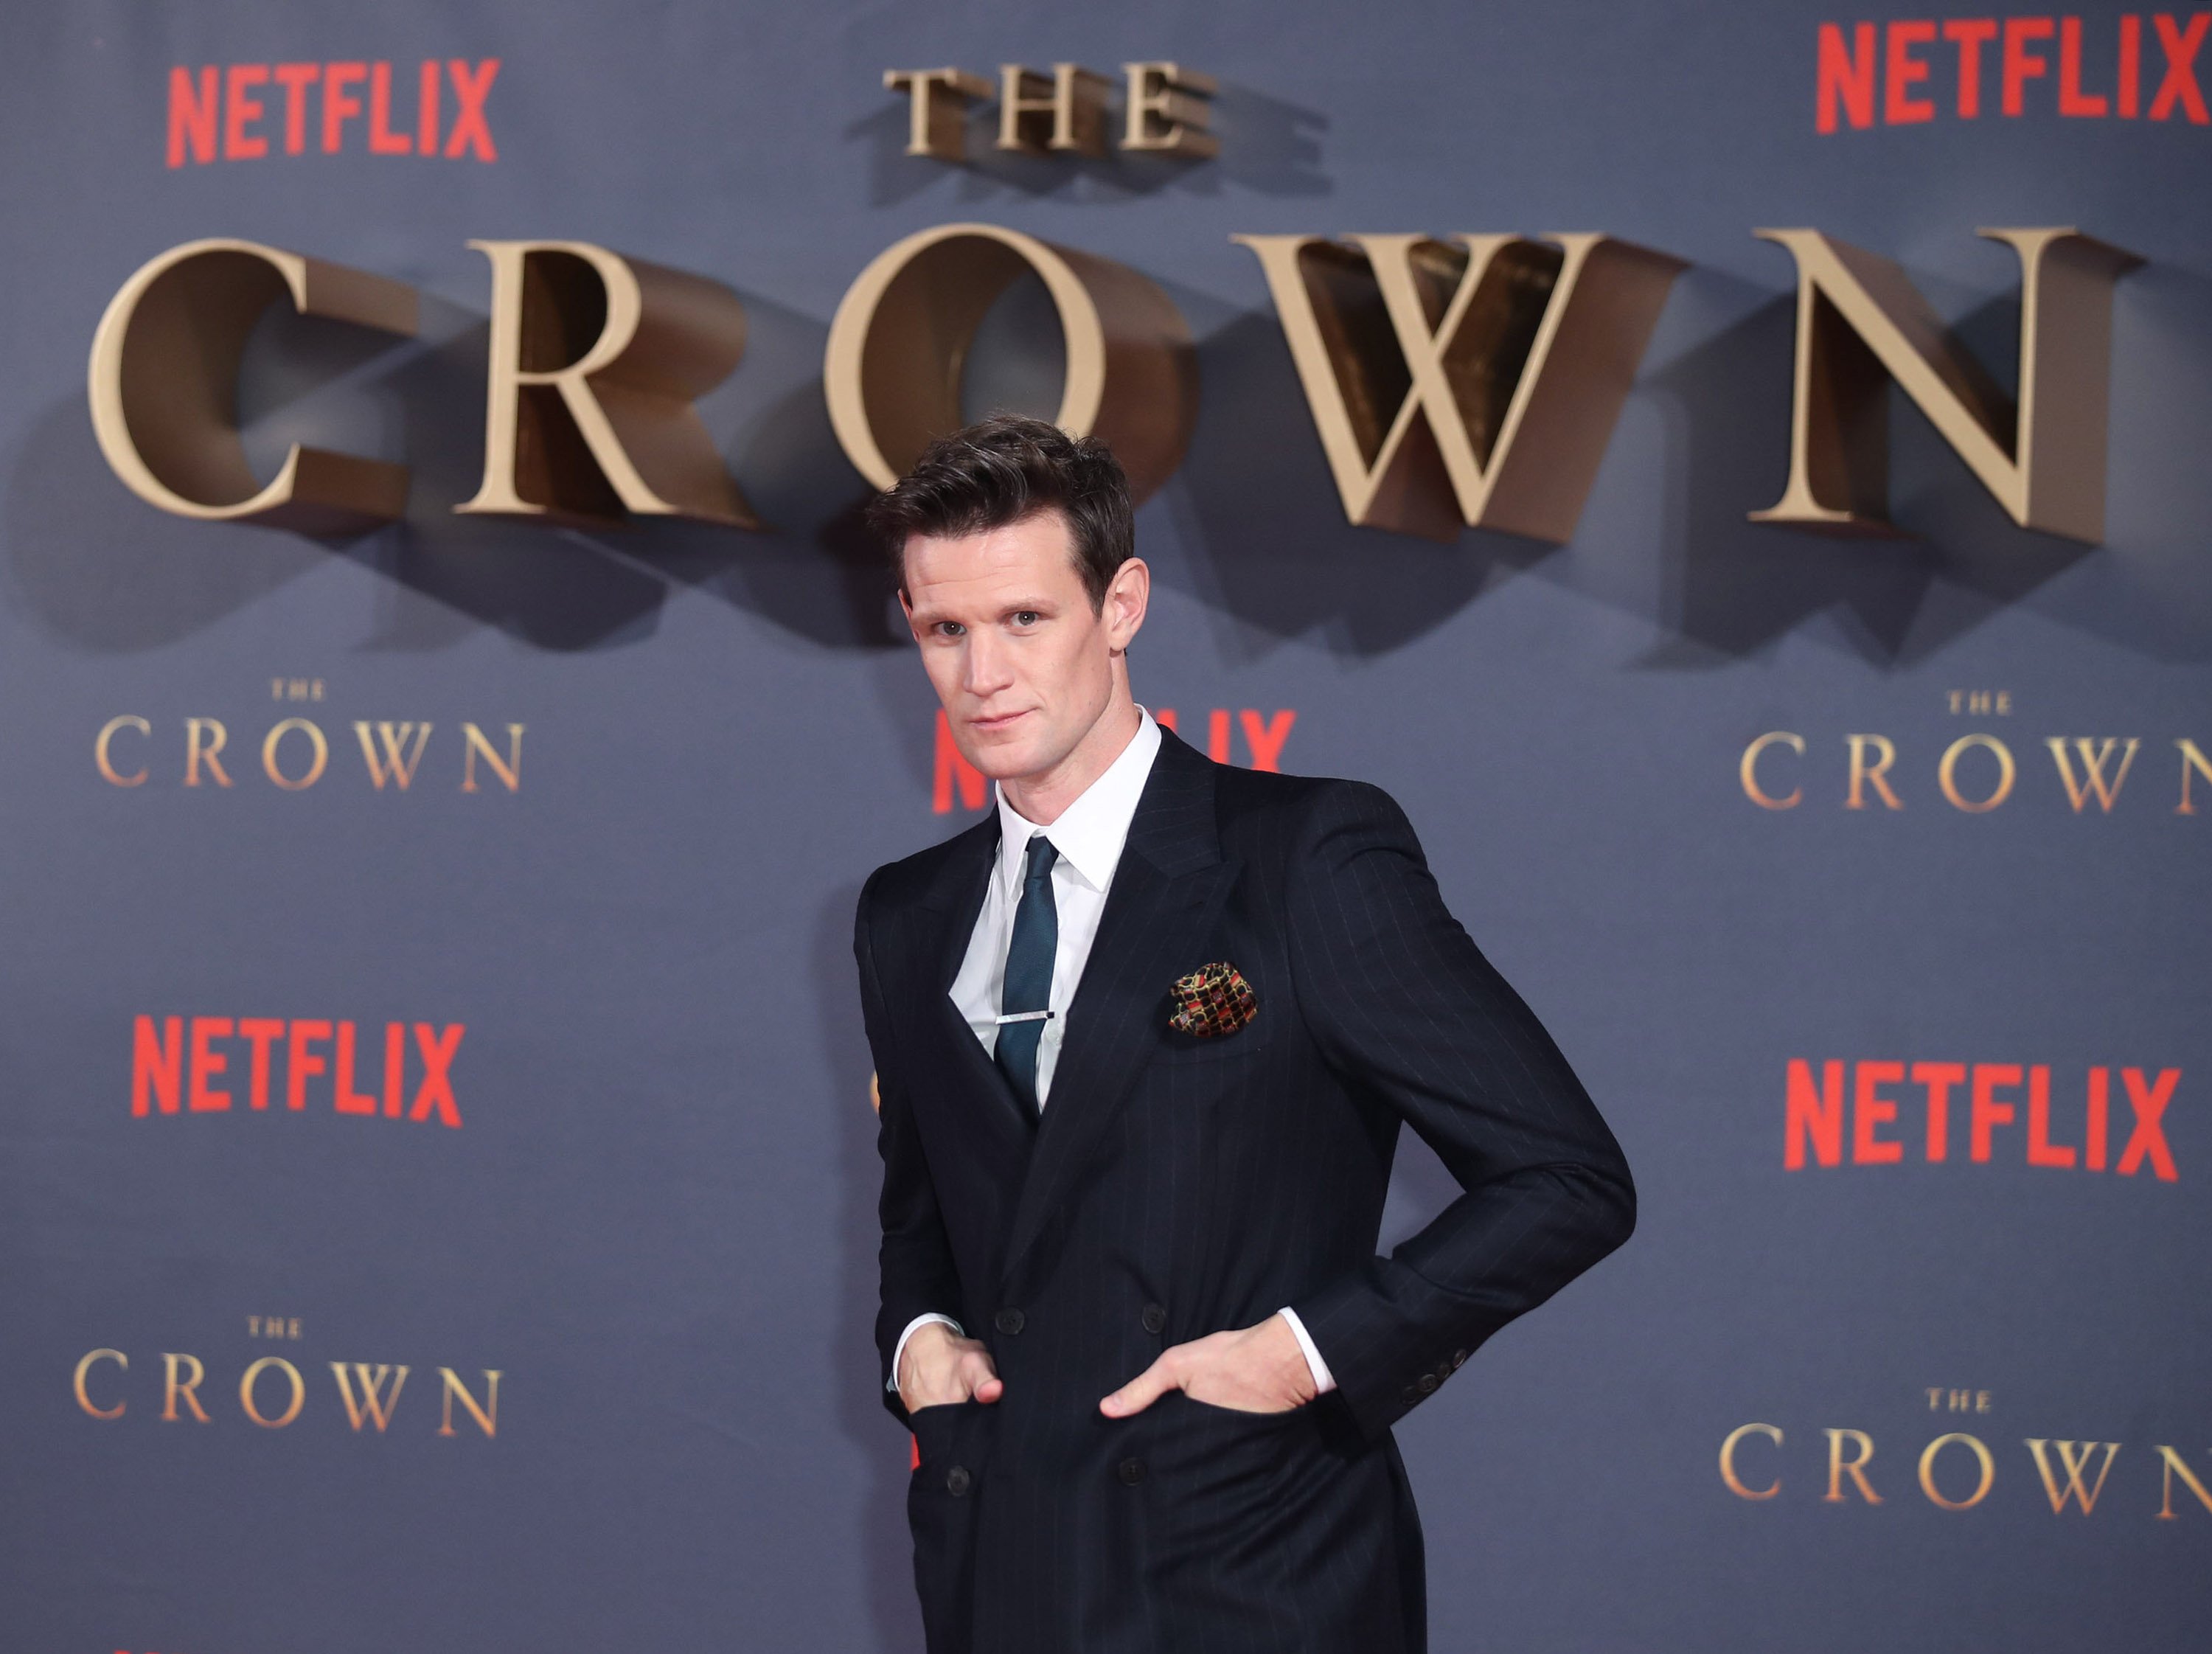 Matt Smith attends the World Premiere of season 2 of Netflix "The Crown" at Odeon Leicester Square on November 21, 2017 in London, England. | Source: Getty Images